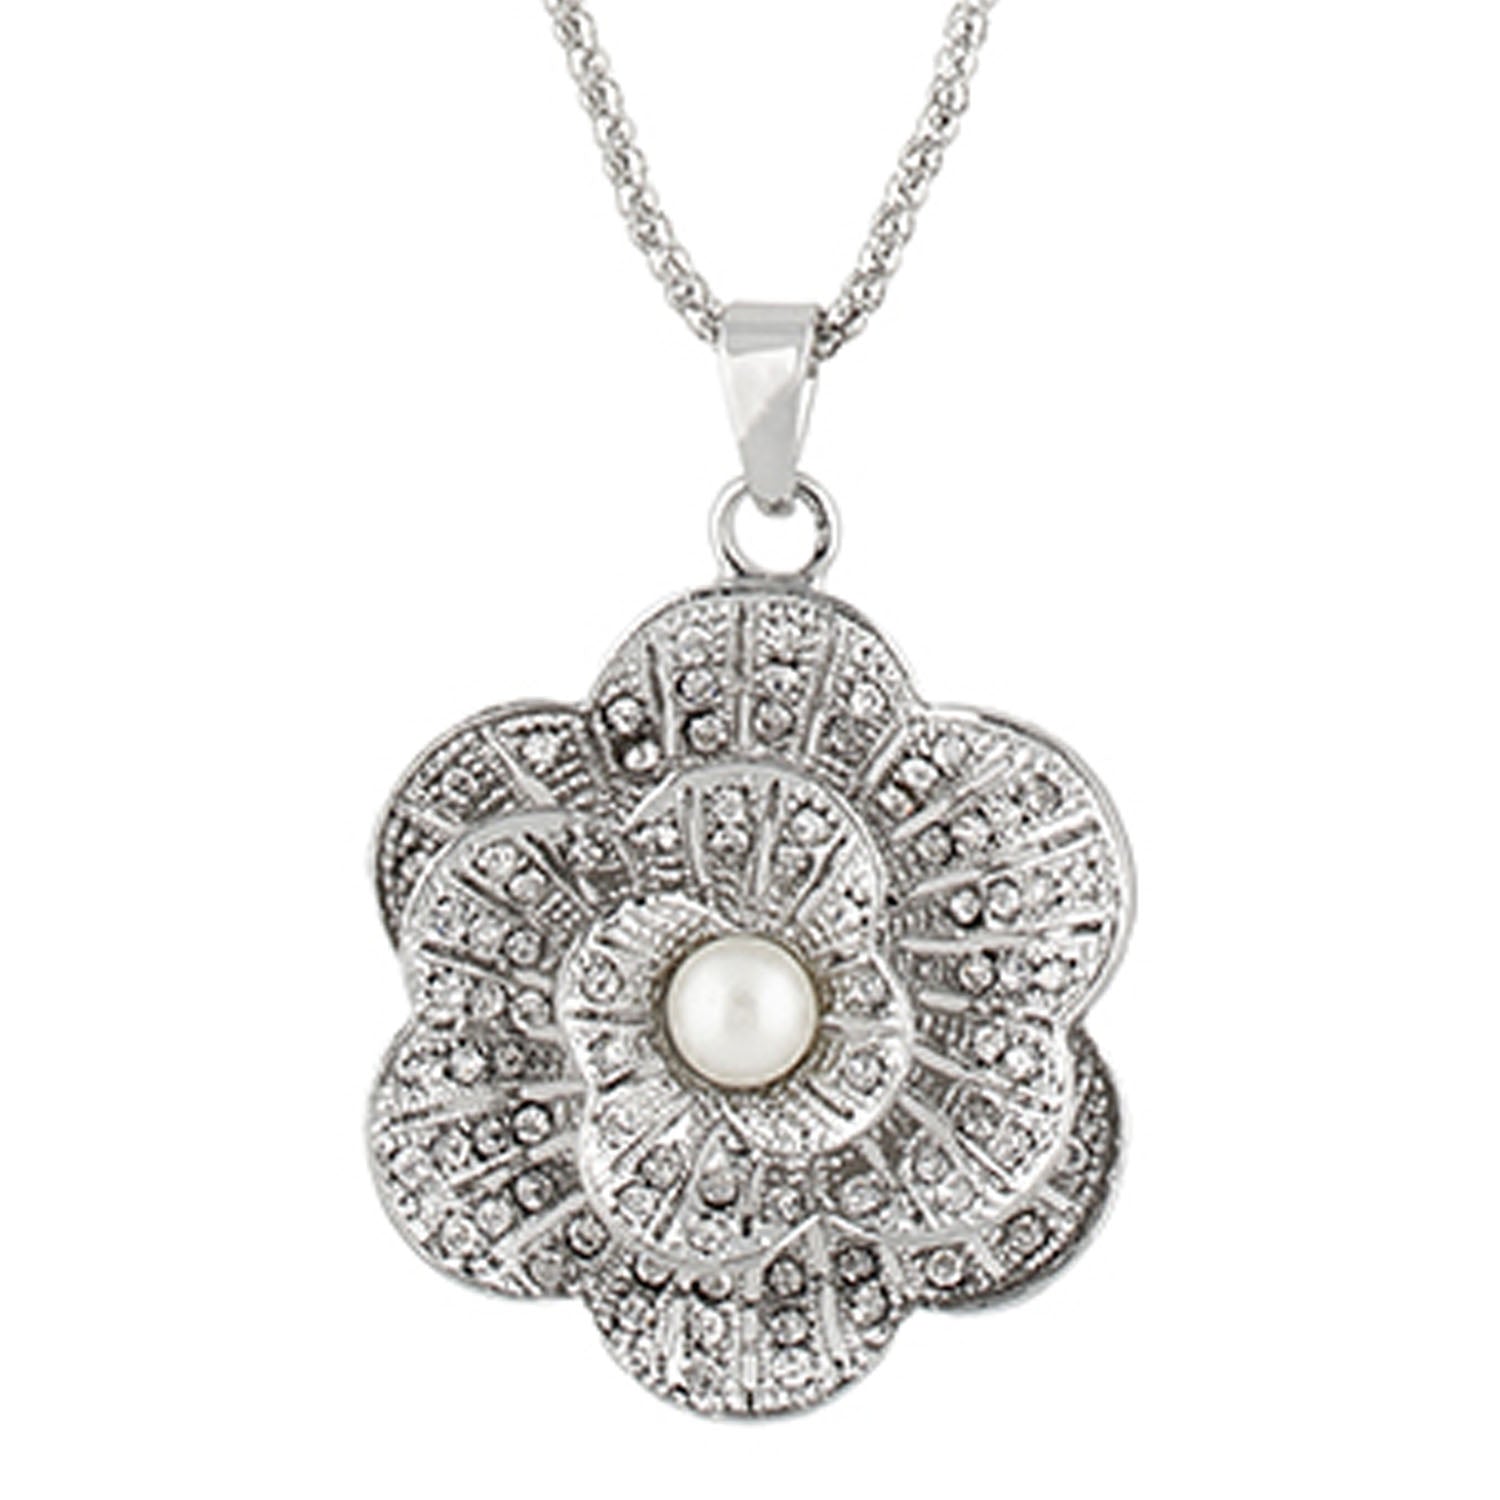 Grey Colour Floral Shape Alloy Pendant with Chain for Girls and Women